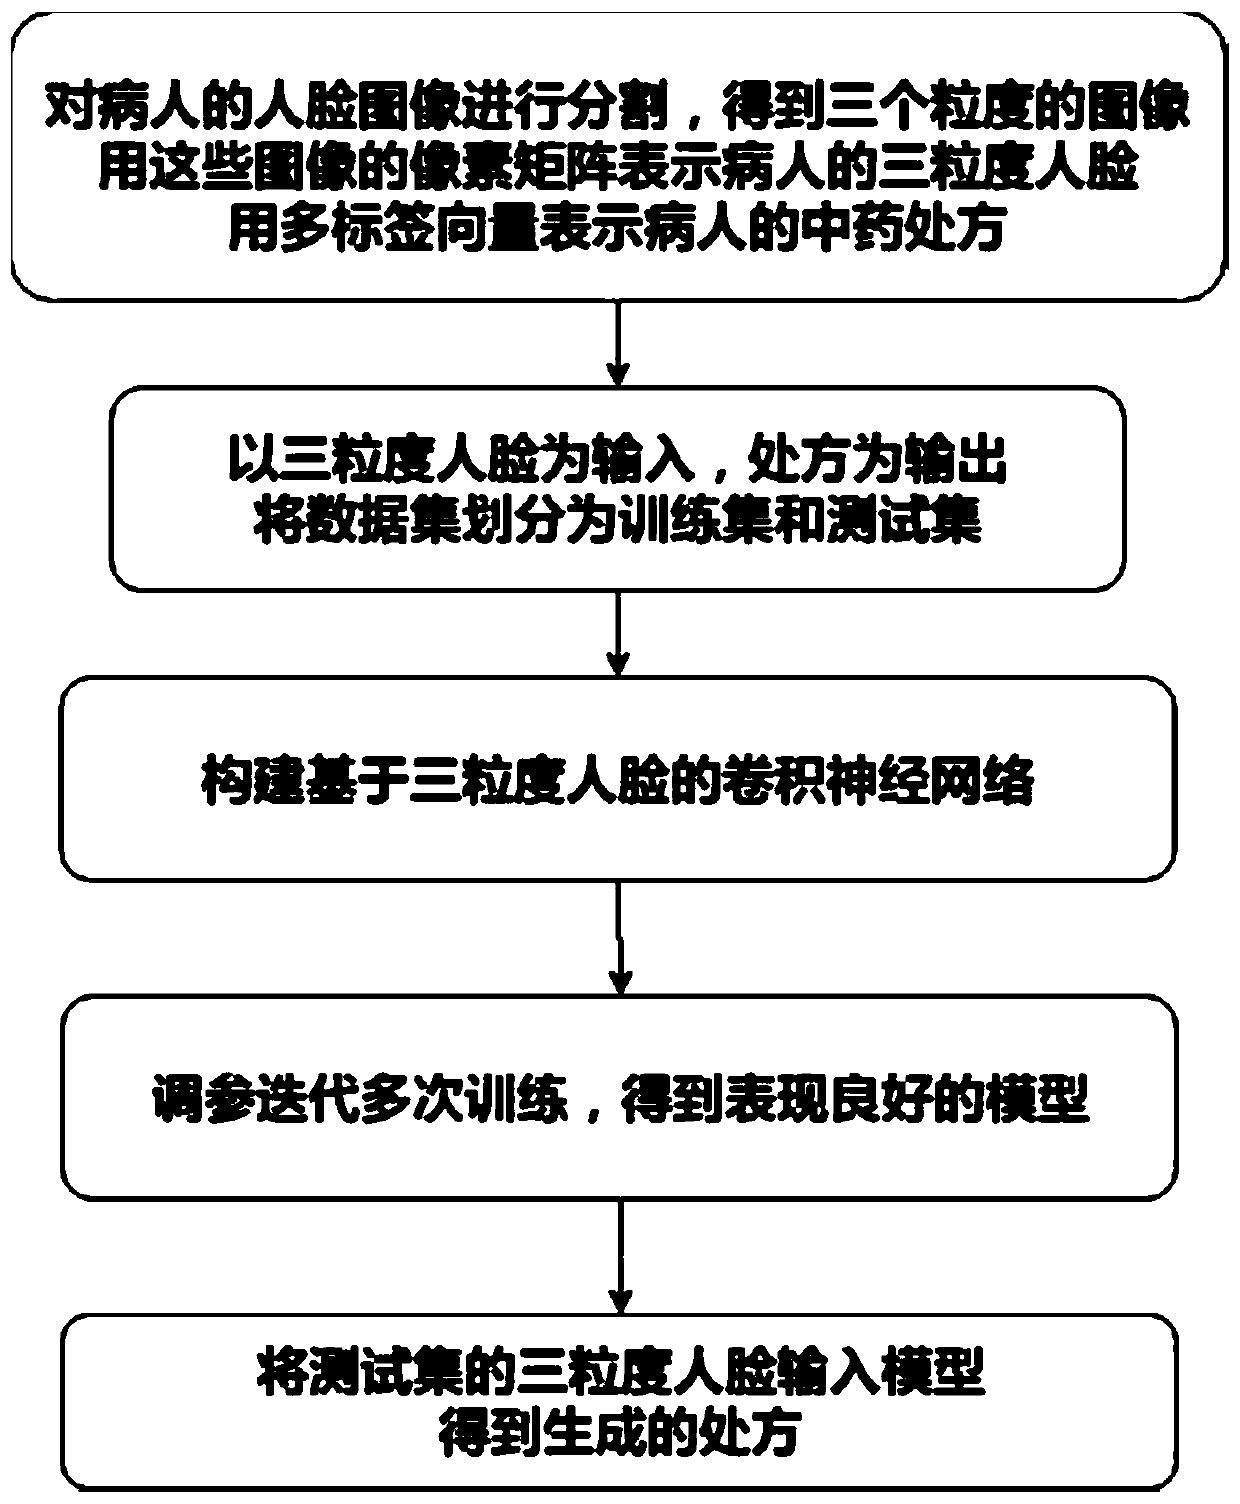 Method for generating traditional Chinese medicine prescription based on deep learning